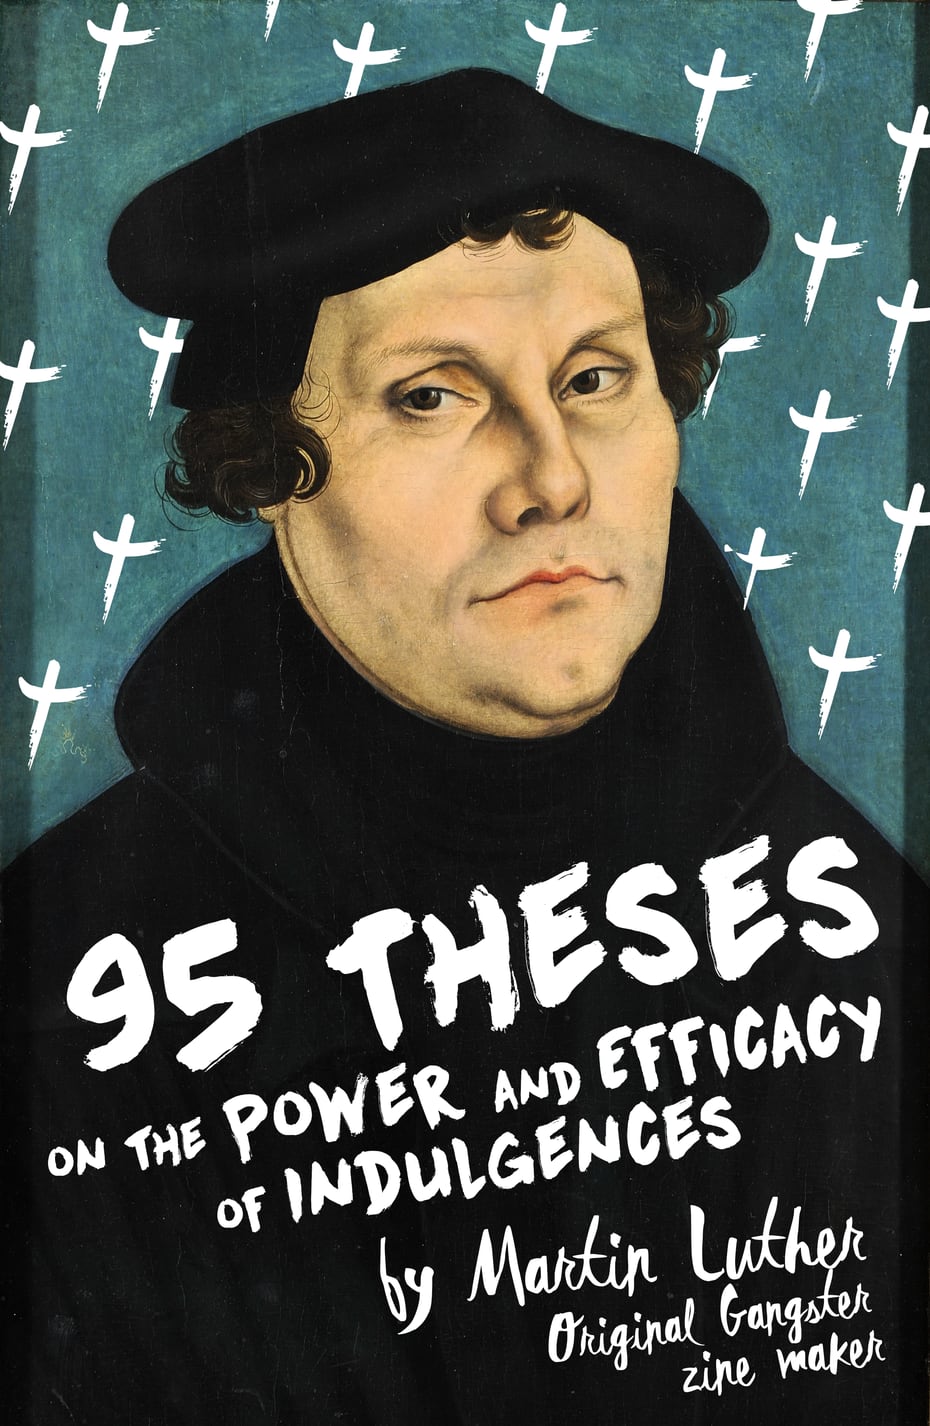 Potential zine cover art if Martin Luther's 95 Theses were to be re-printed.